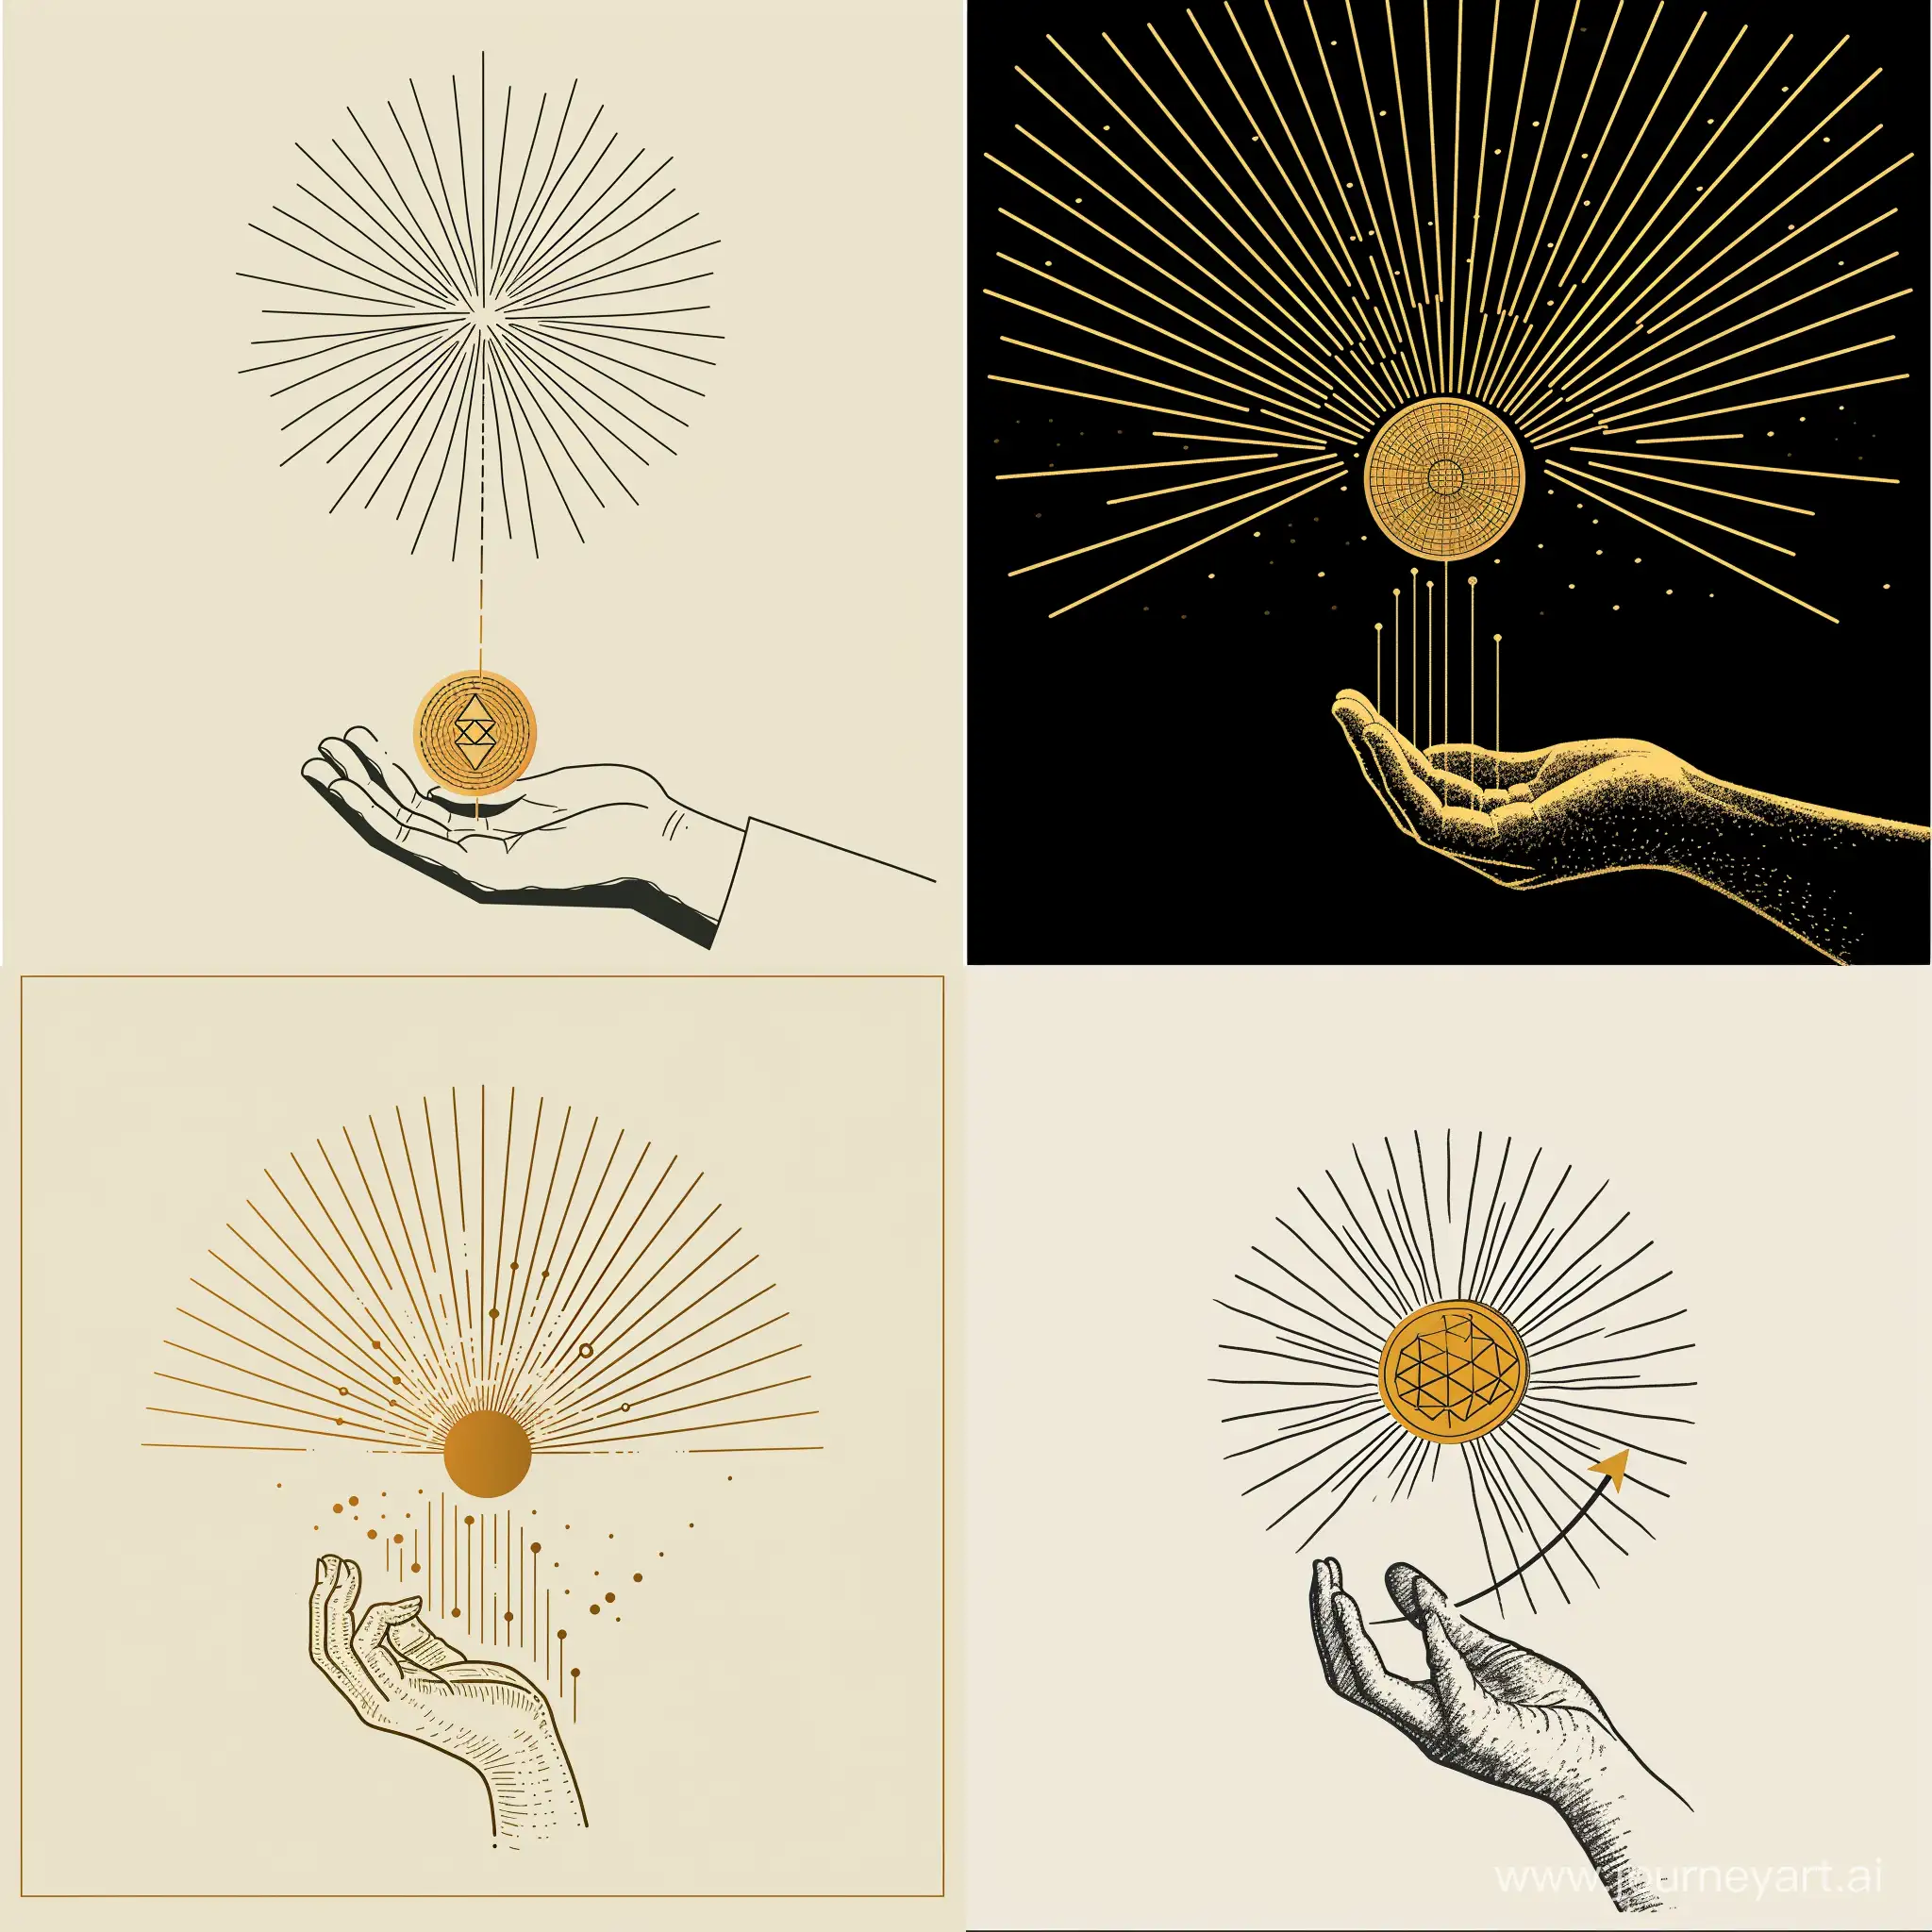 Concept:

Abstract Coin:
Prompt: /imagine a minimalist line art symbol of a coin, radiating outwards, in the style of Saul Bass.
Style: Minimalist, abstract, line art, Saul Bass
Metaphorical Coin:
Prompt: /imagine a hand holding a golden globe, symbolizing global financial expertise, in the style of Art Deco.
Style: Art Deco, detailed, elegant, globe instead of coin
Conceptual Coin:
Prompt: /imagine a single stylized coin transforming into a line graph depicting upward growth, in the style of Escher.
Style: Escher, optical illusion, growth theme, geometric
Additional Tips:

Use specific artists or art styles as references for Midjourney to understand the desired aesthetic.
Experiment with different prompts and styles to see what resonates with you.
Use negative prompts to exclude unwanted elements, like "not realistic" or "not detailed".
Combine multiple elements from different hints to create a unique design.